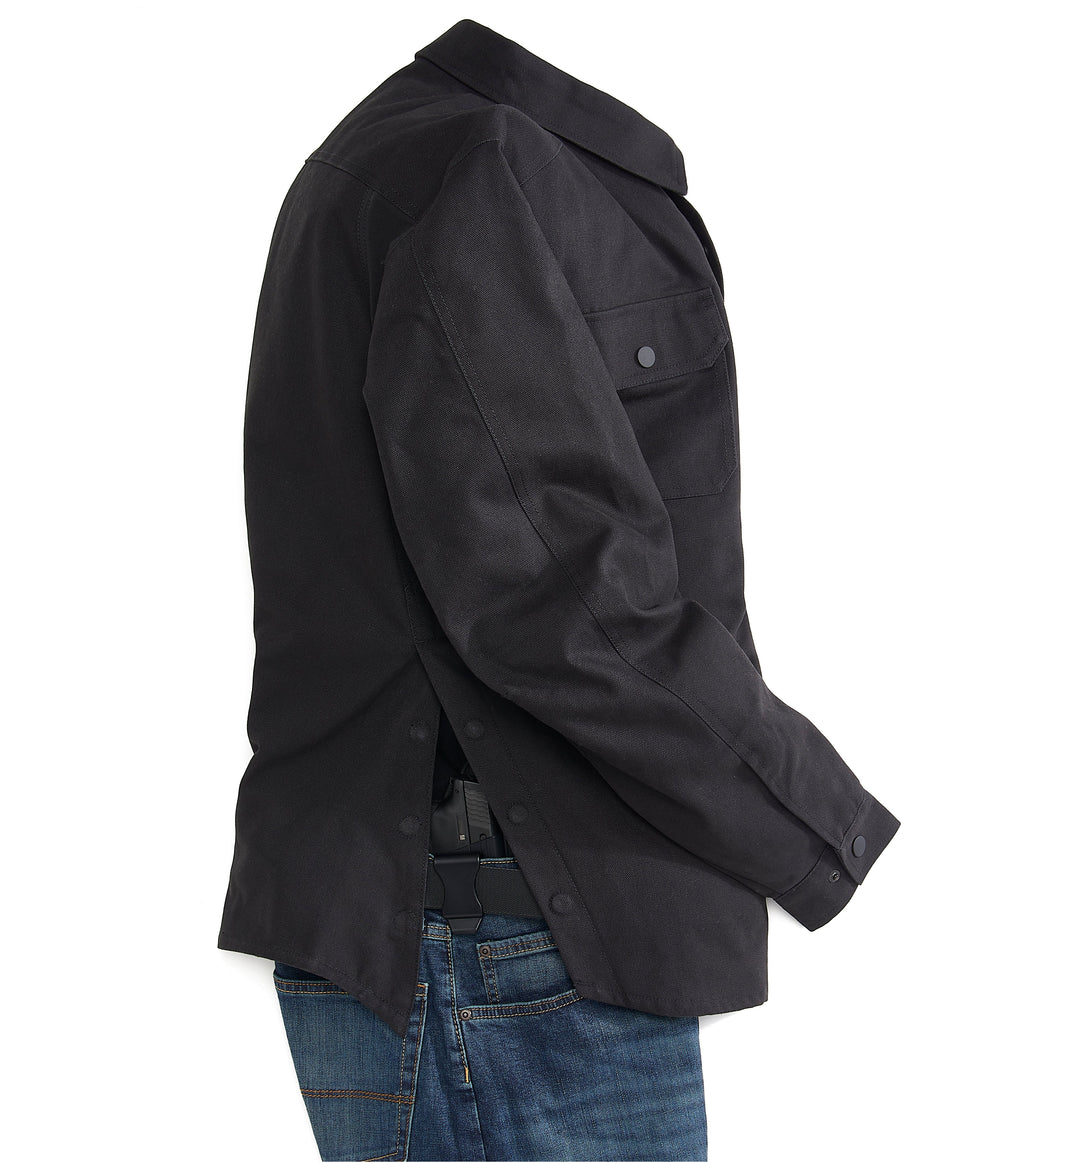 Quick Draw Canvas Concealed Carry Jacket Venado Small 